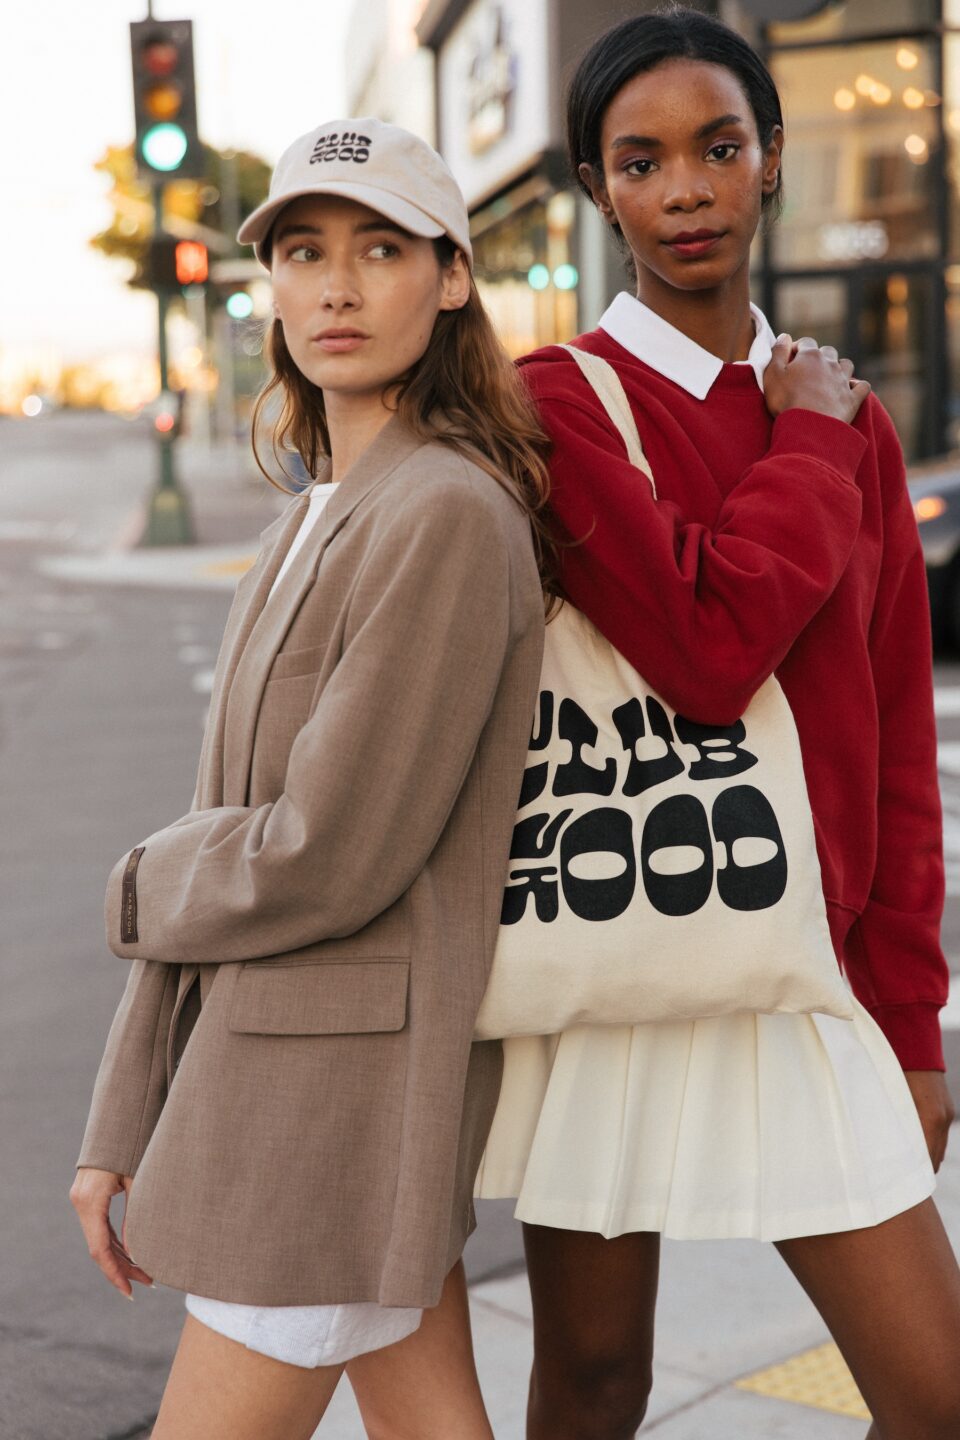 Two Shop Good models standing on the street